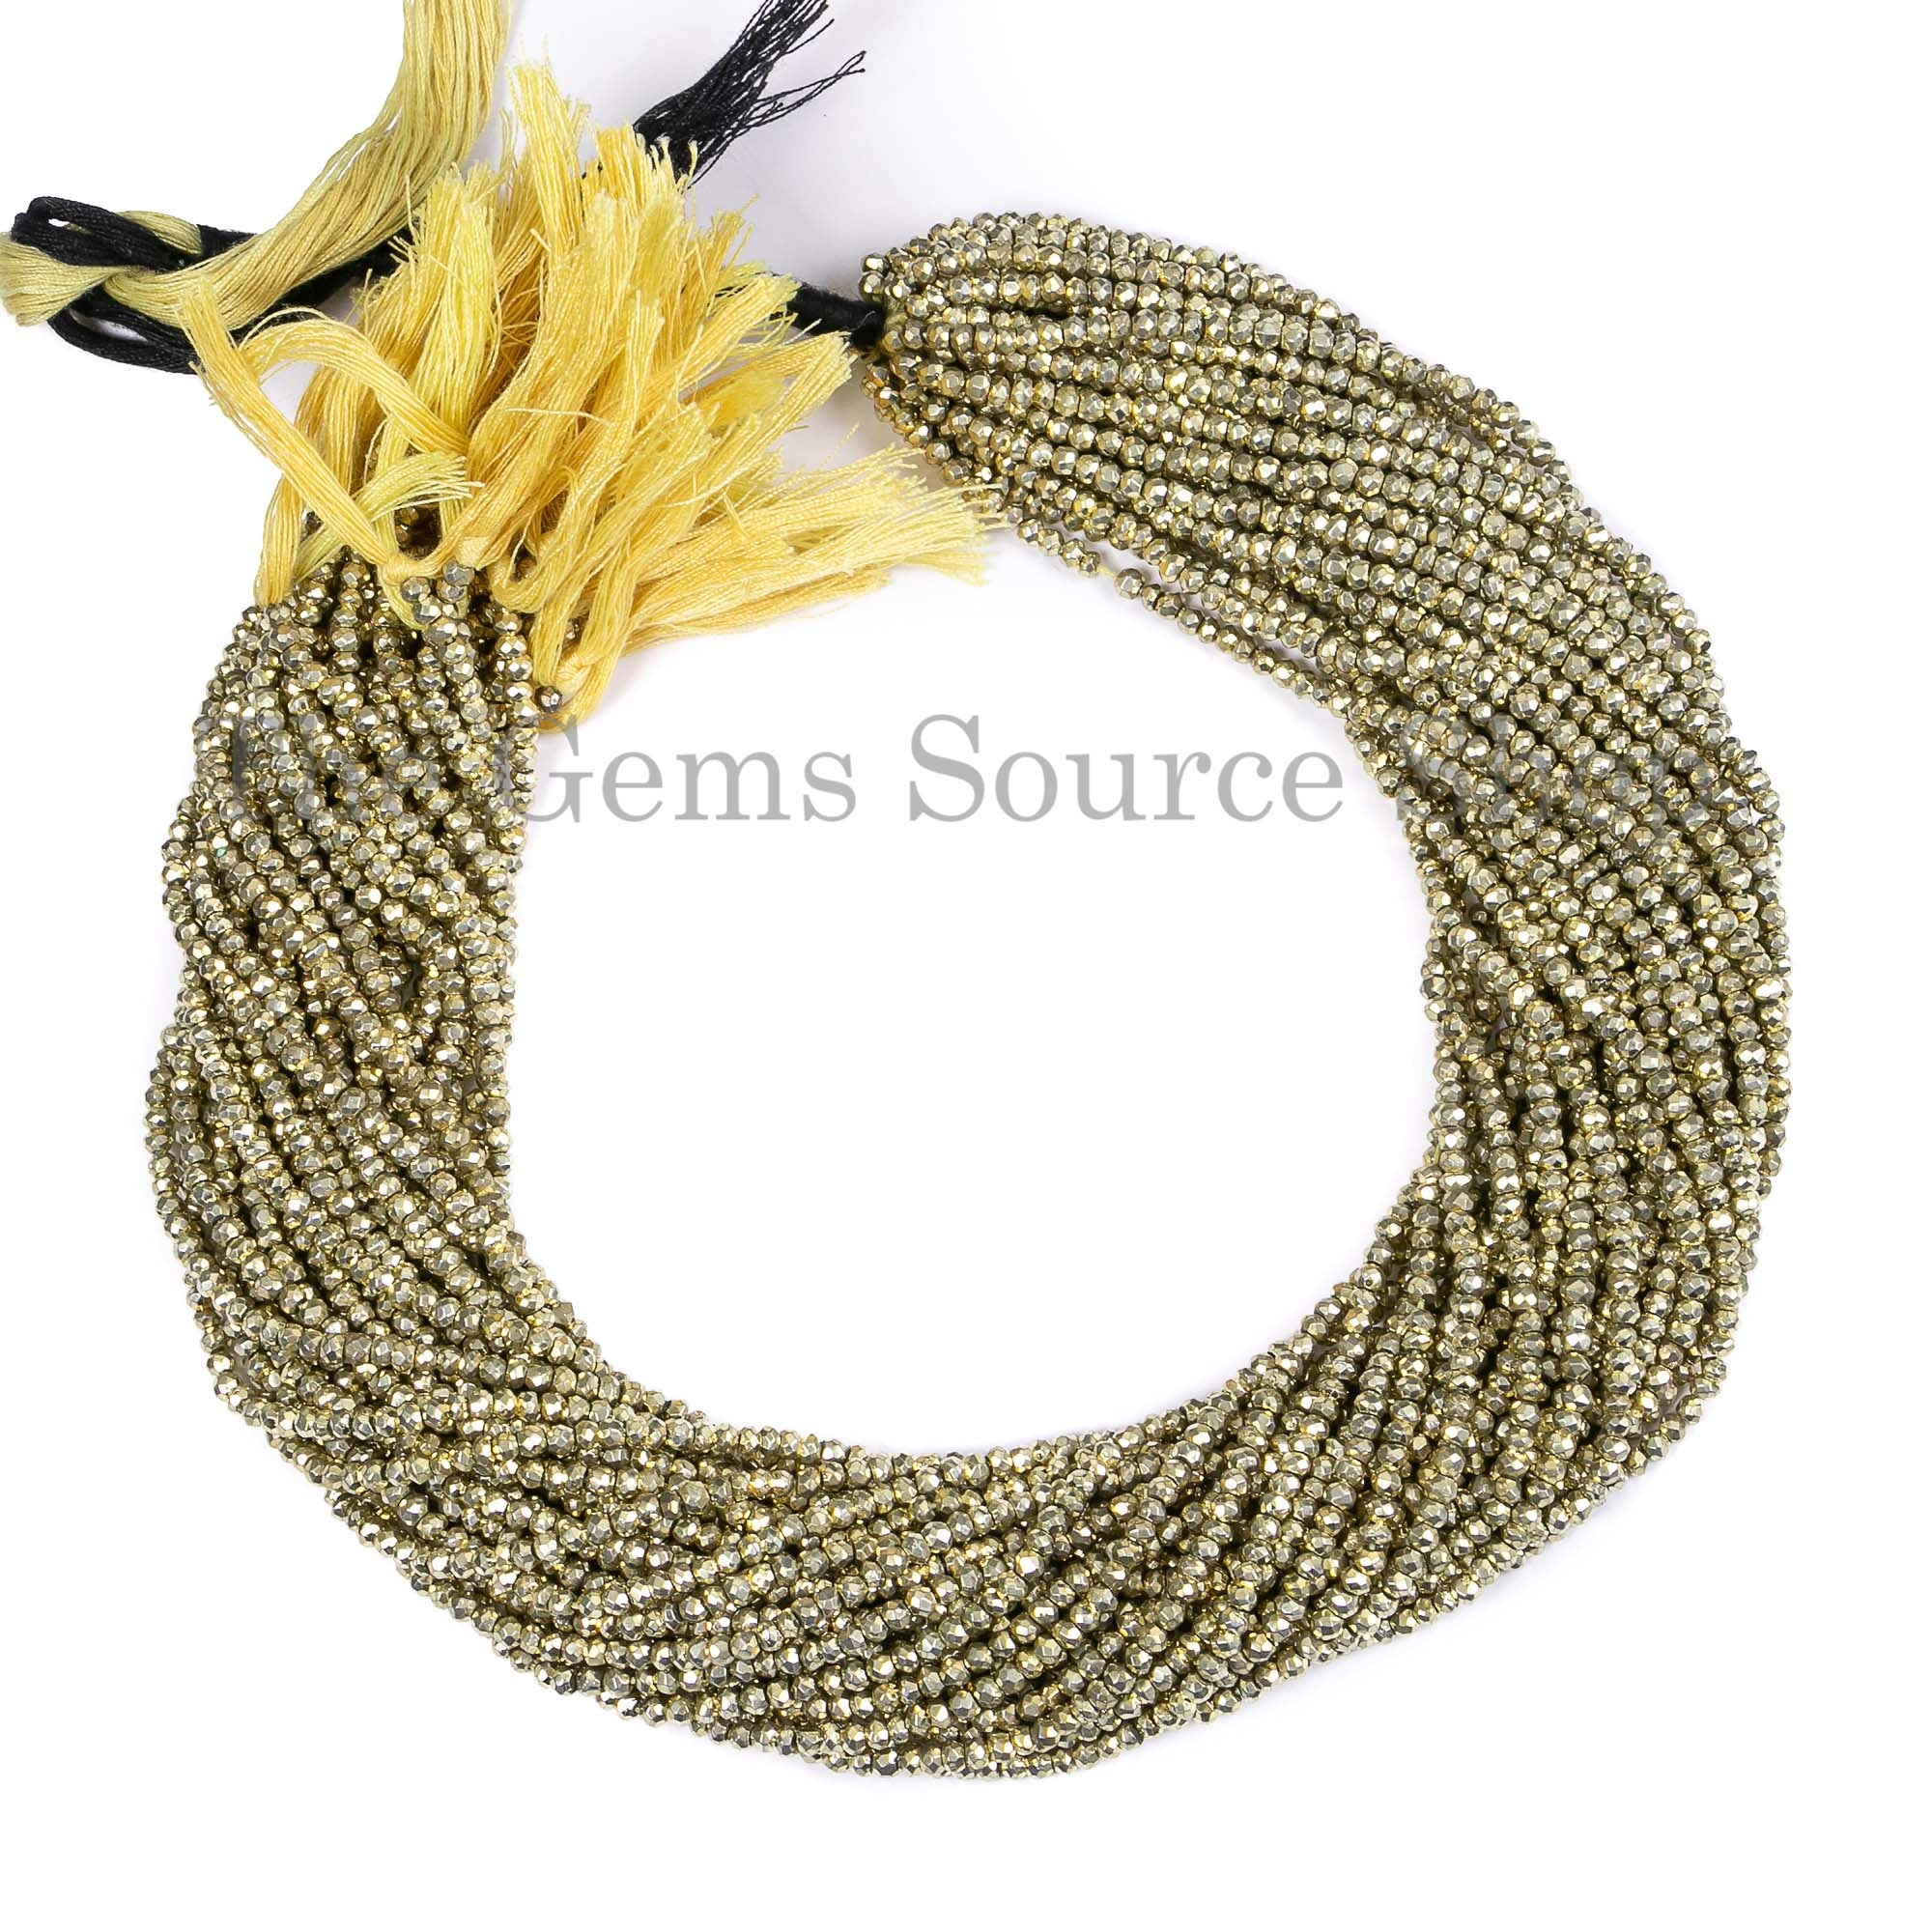 Natural Pyrite Faceted Rondelle Beads, Pyrite Coated Faceted Beads, Natural Pyrite Rondelle Beads